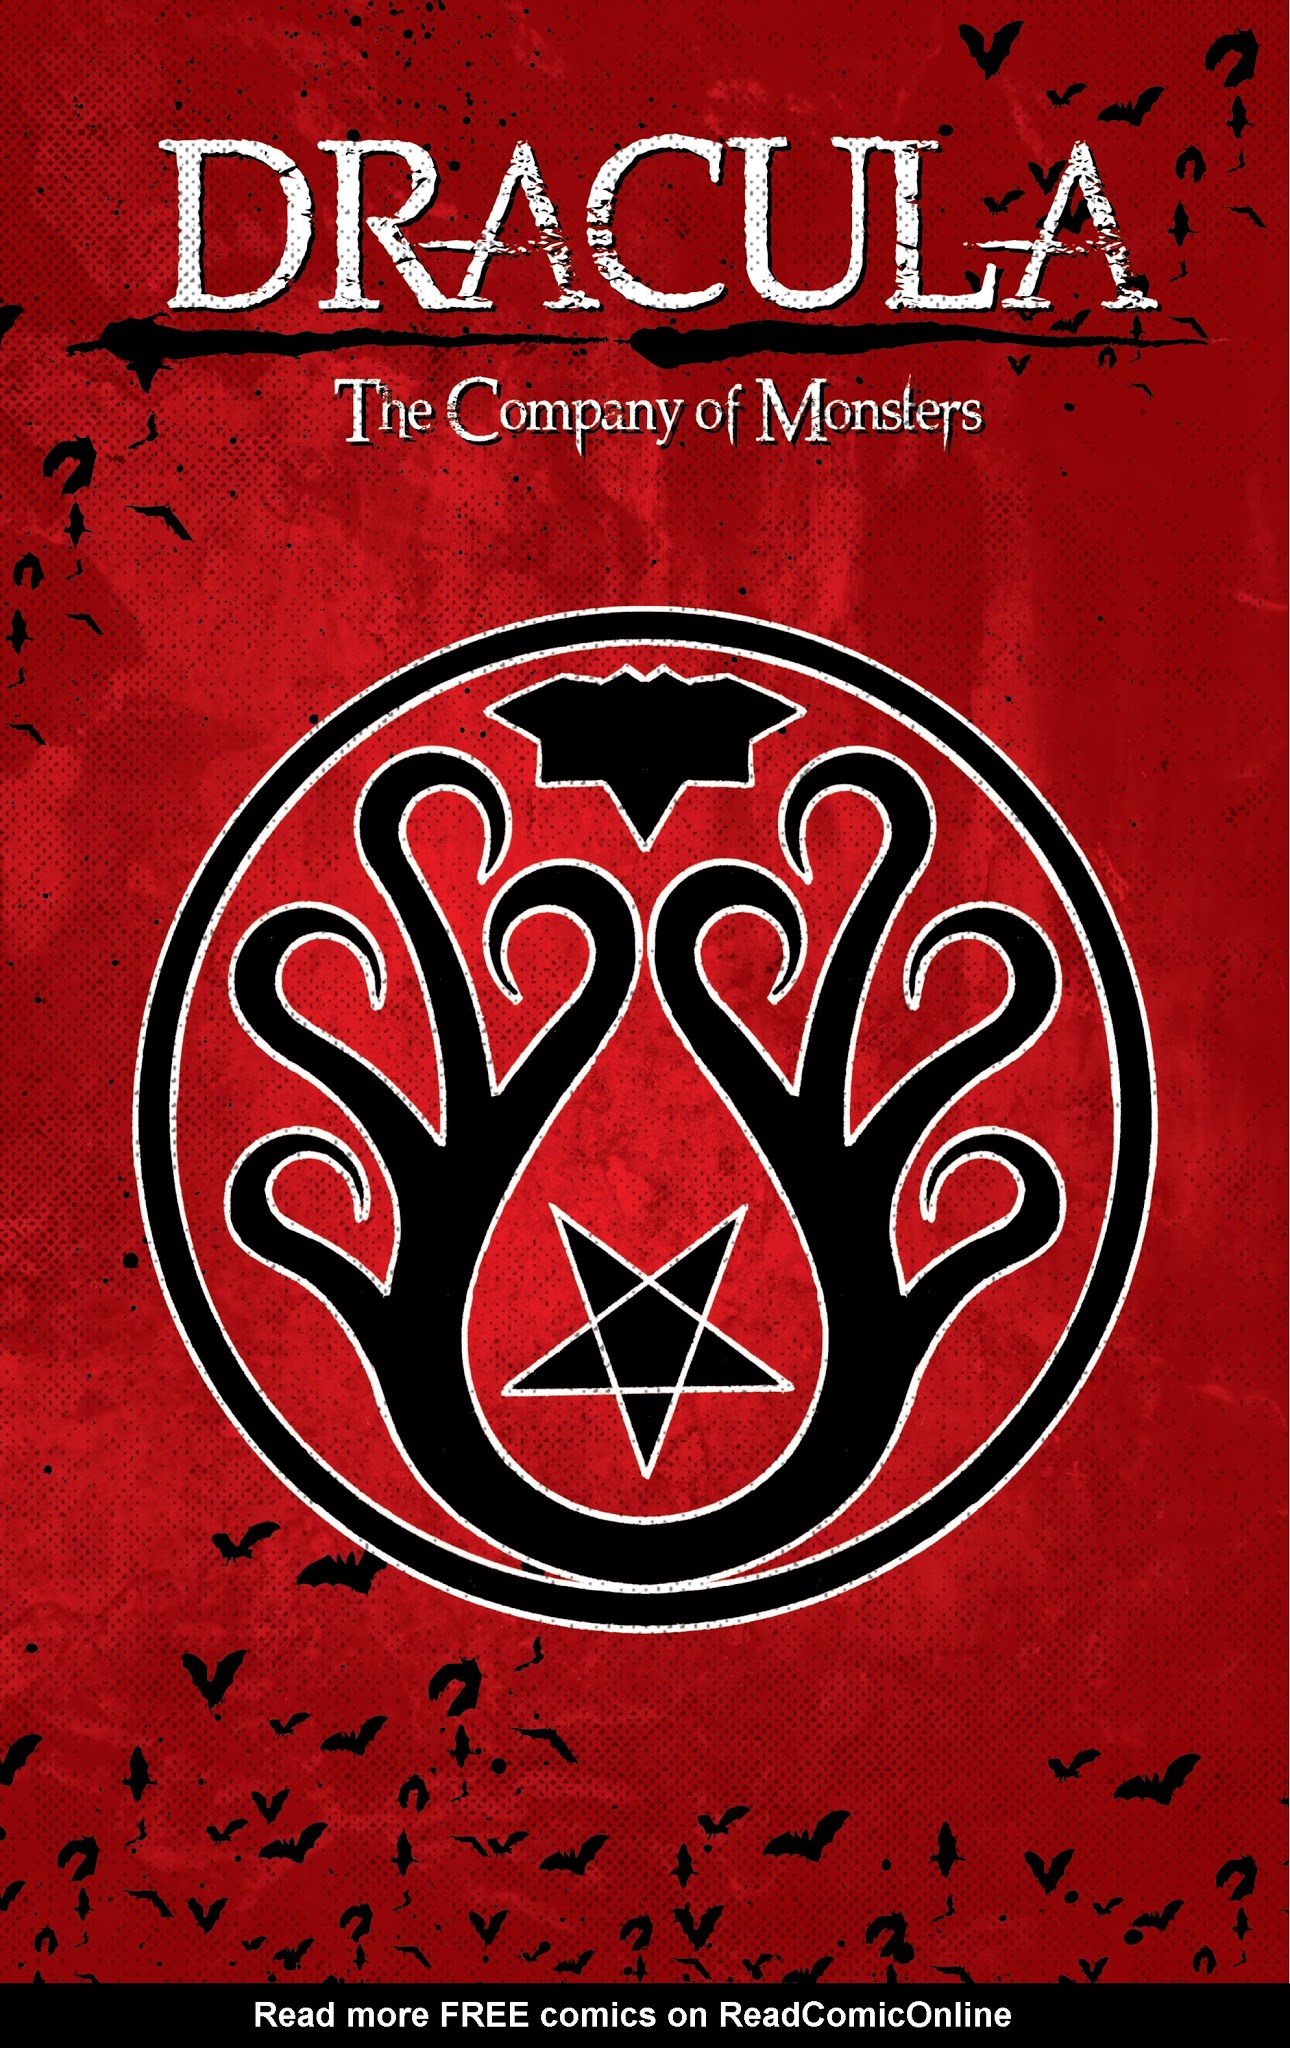 Read online Dracula: The Company of Monsters comic -  Issue # TPB 2 - 2